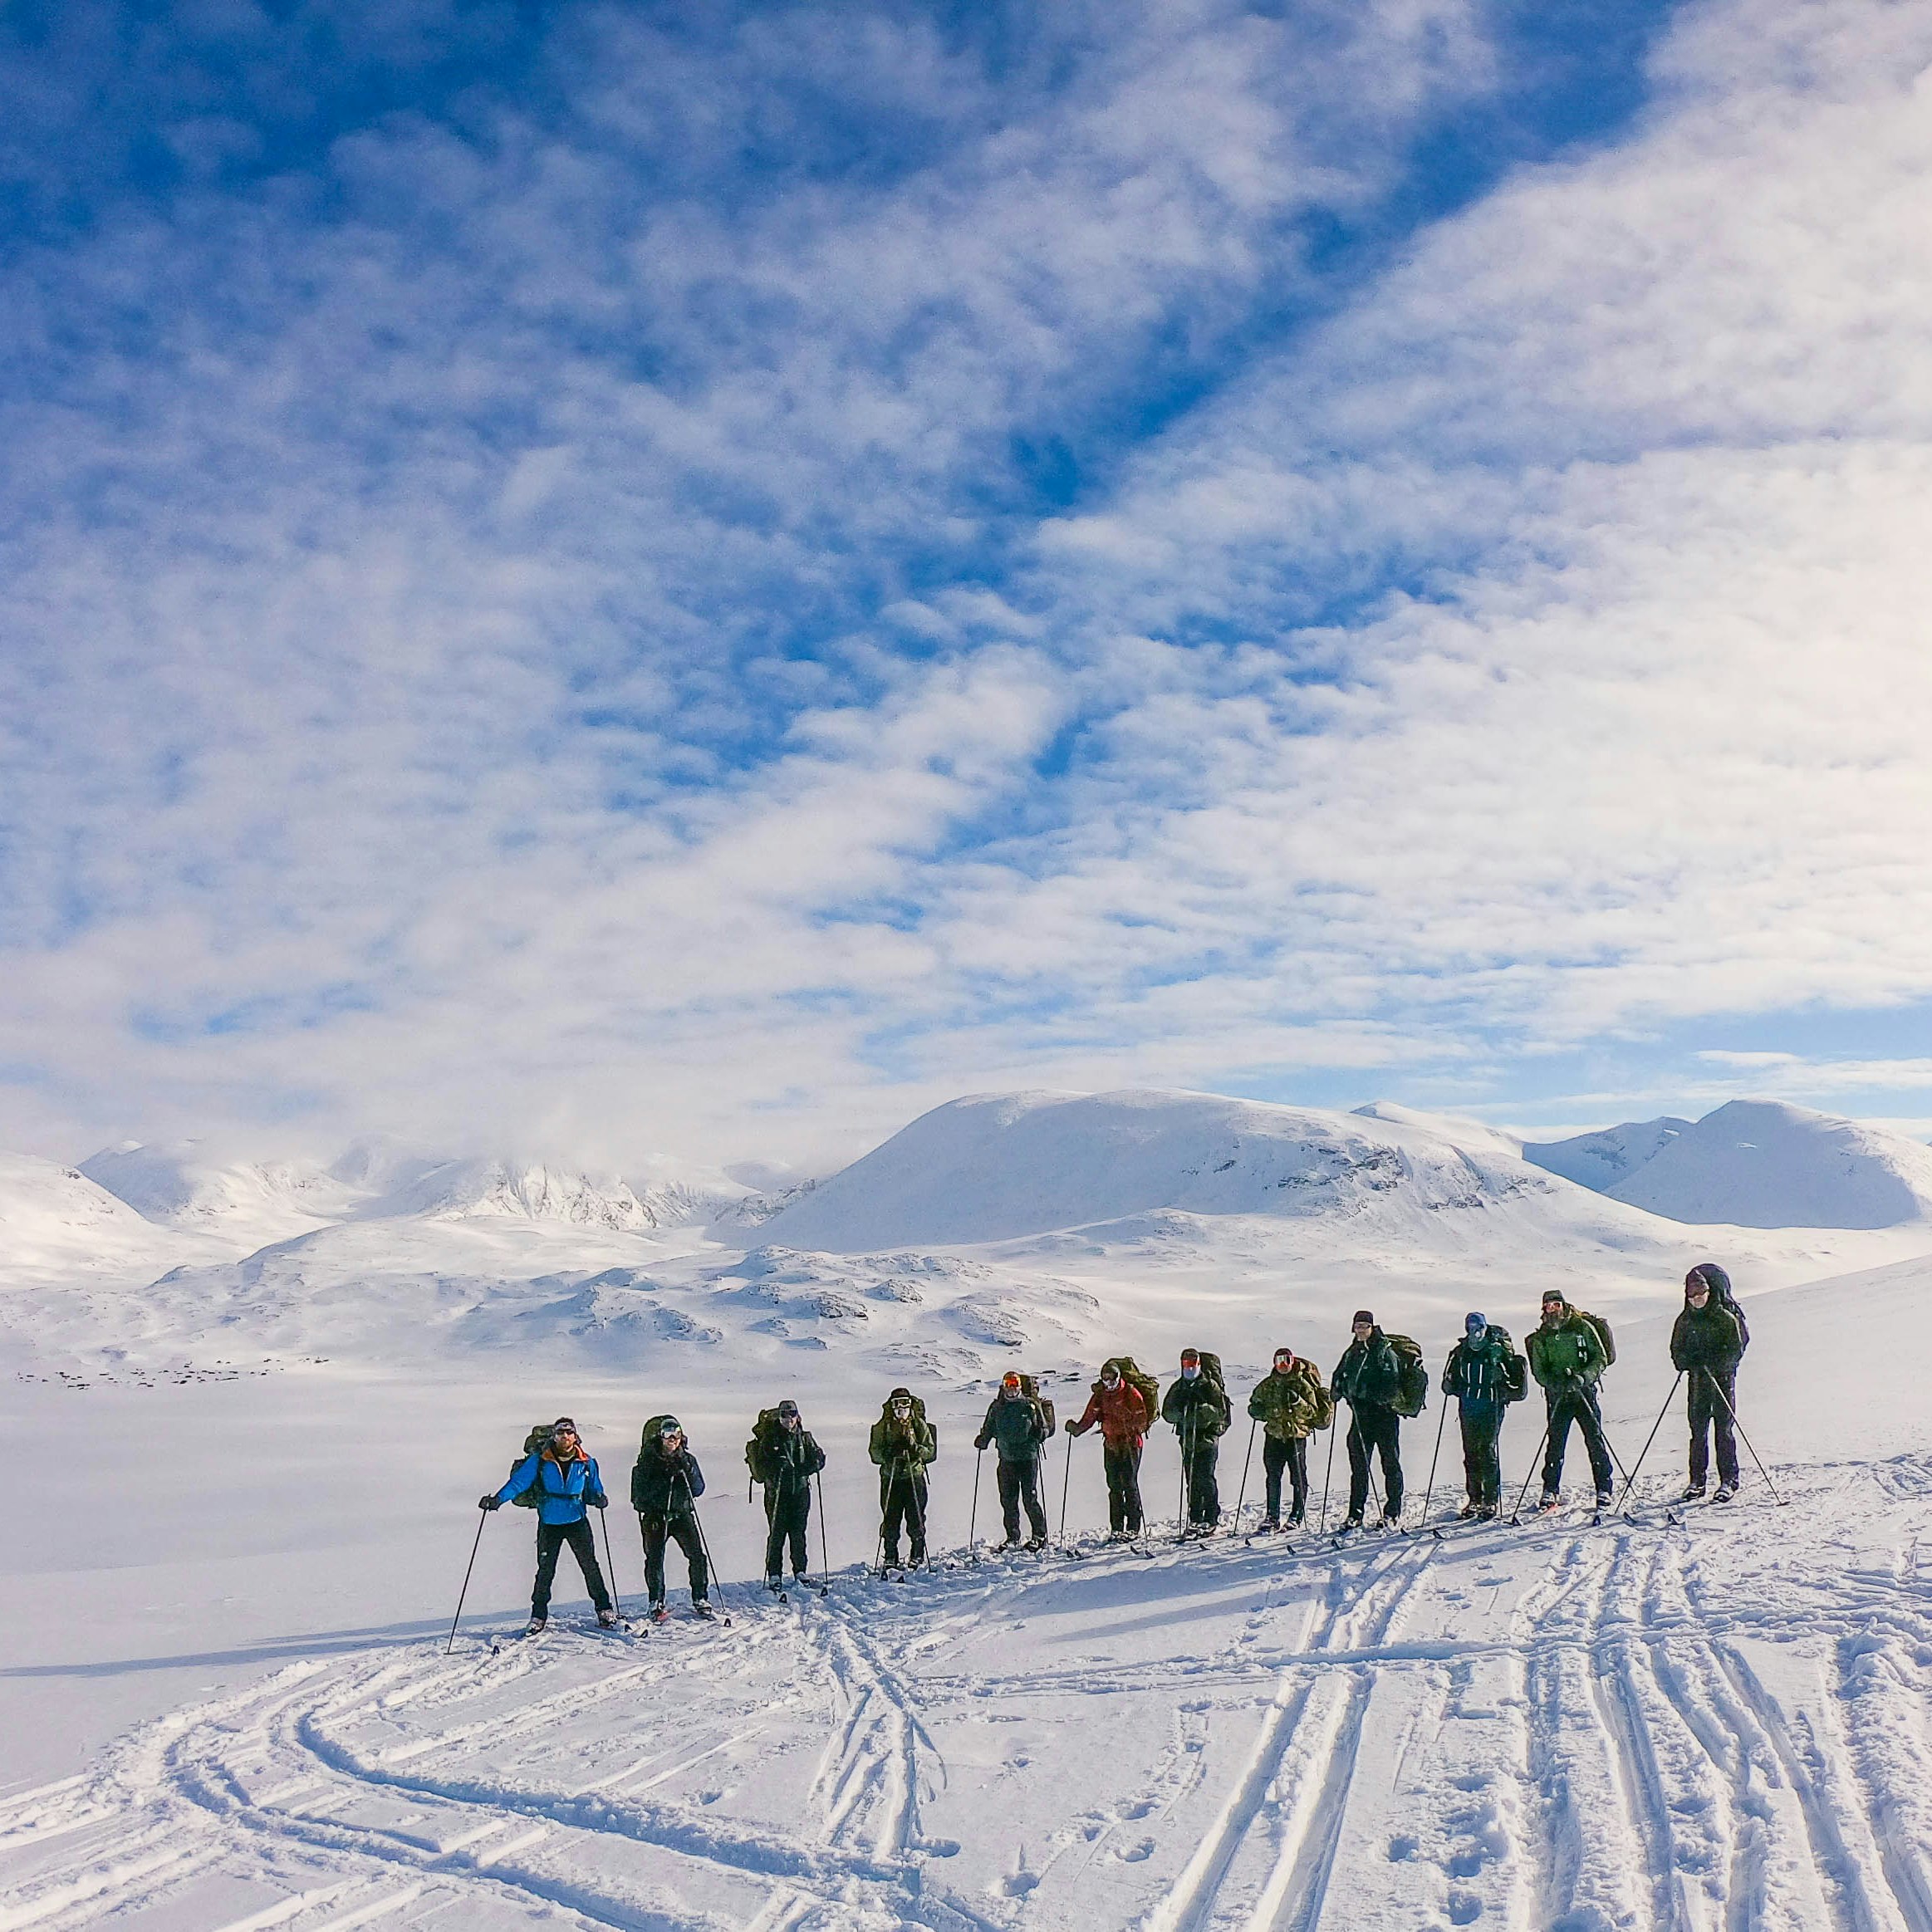 Arctic Warrior 2020 sees groups travelling from Sweden to Norway and back again.